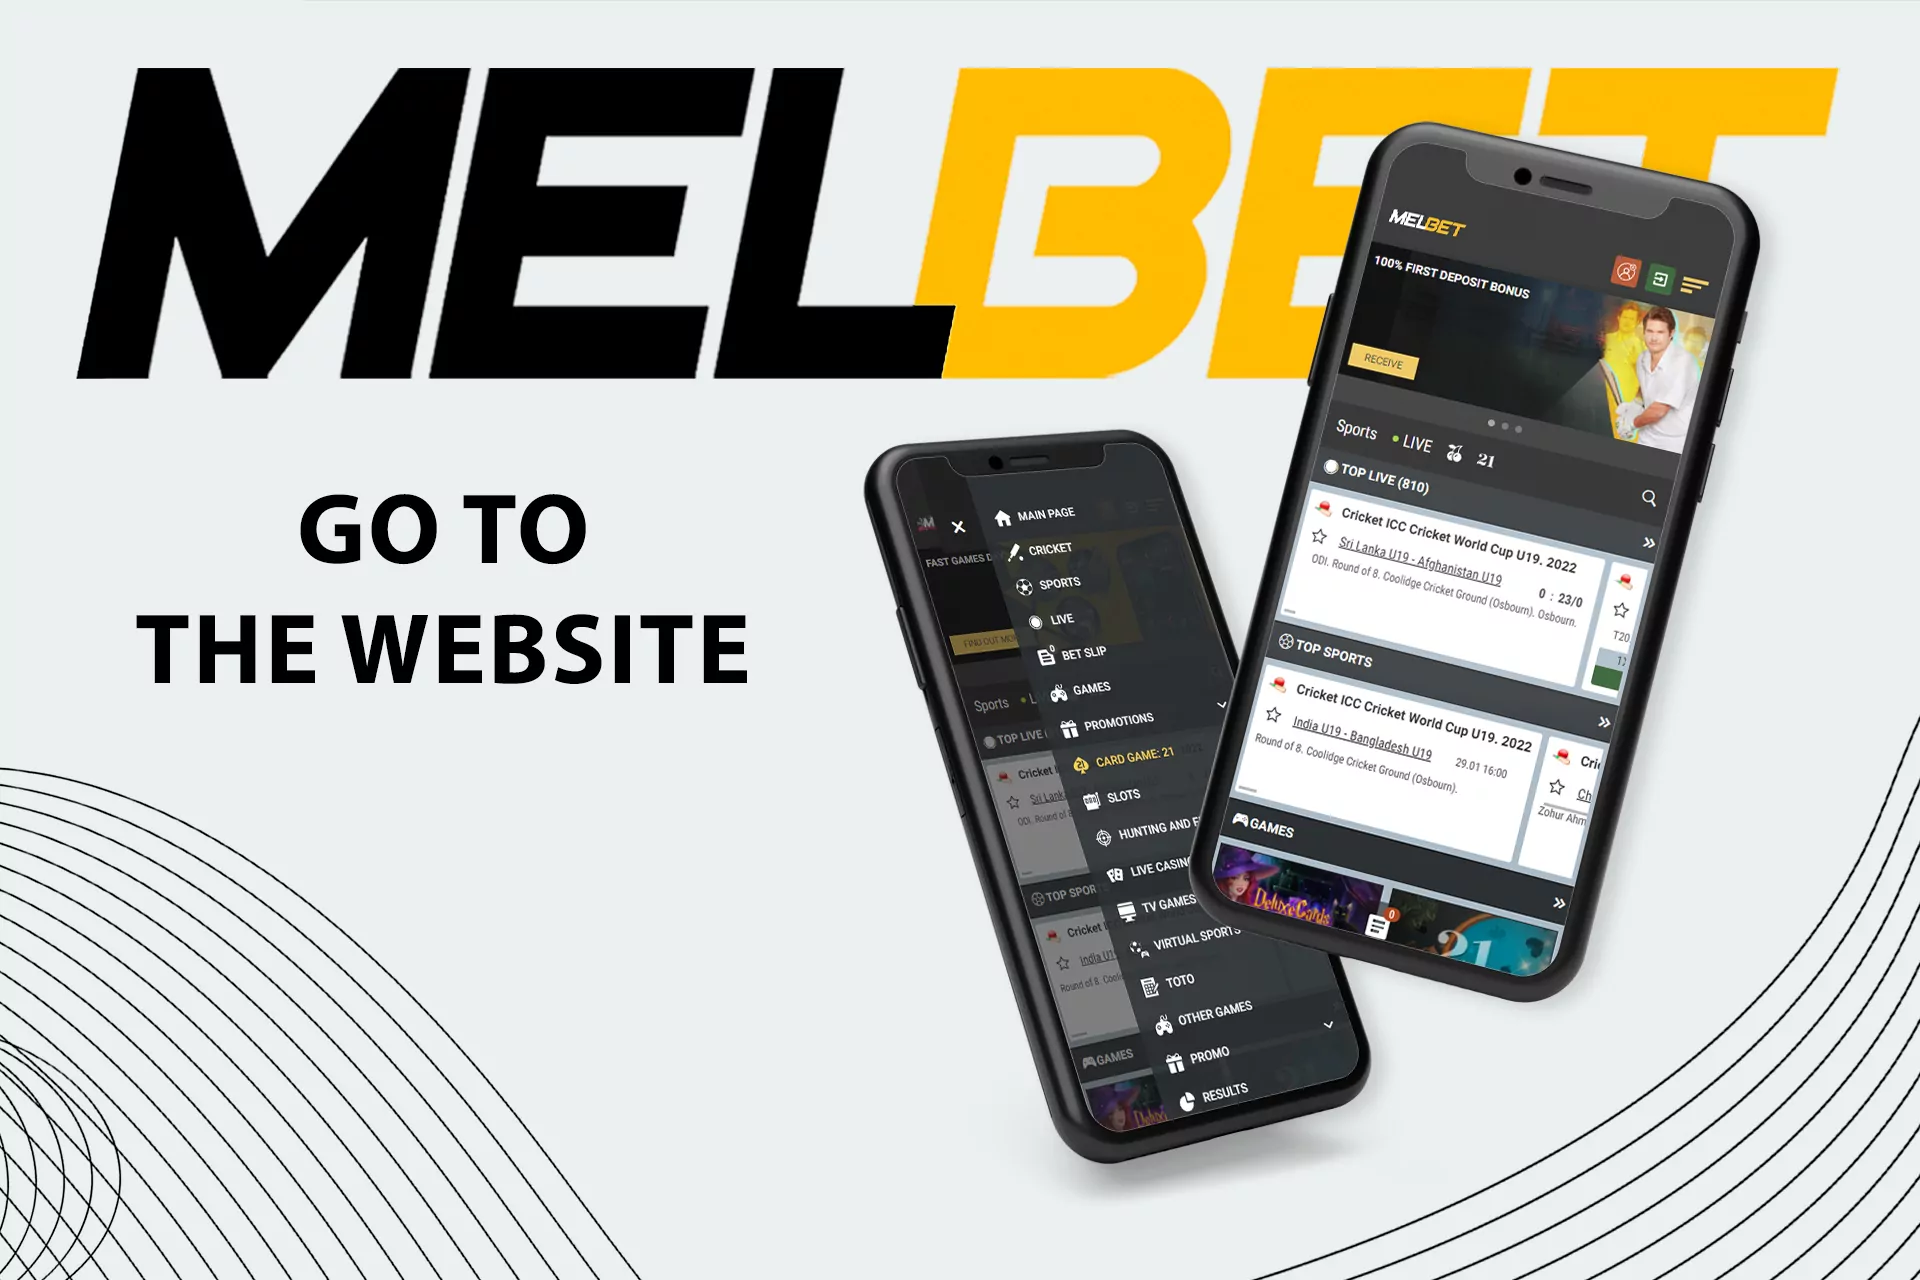 Go to the website to sign up at Melbet with your phone number.